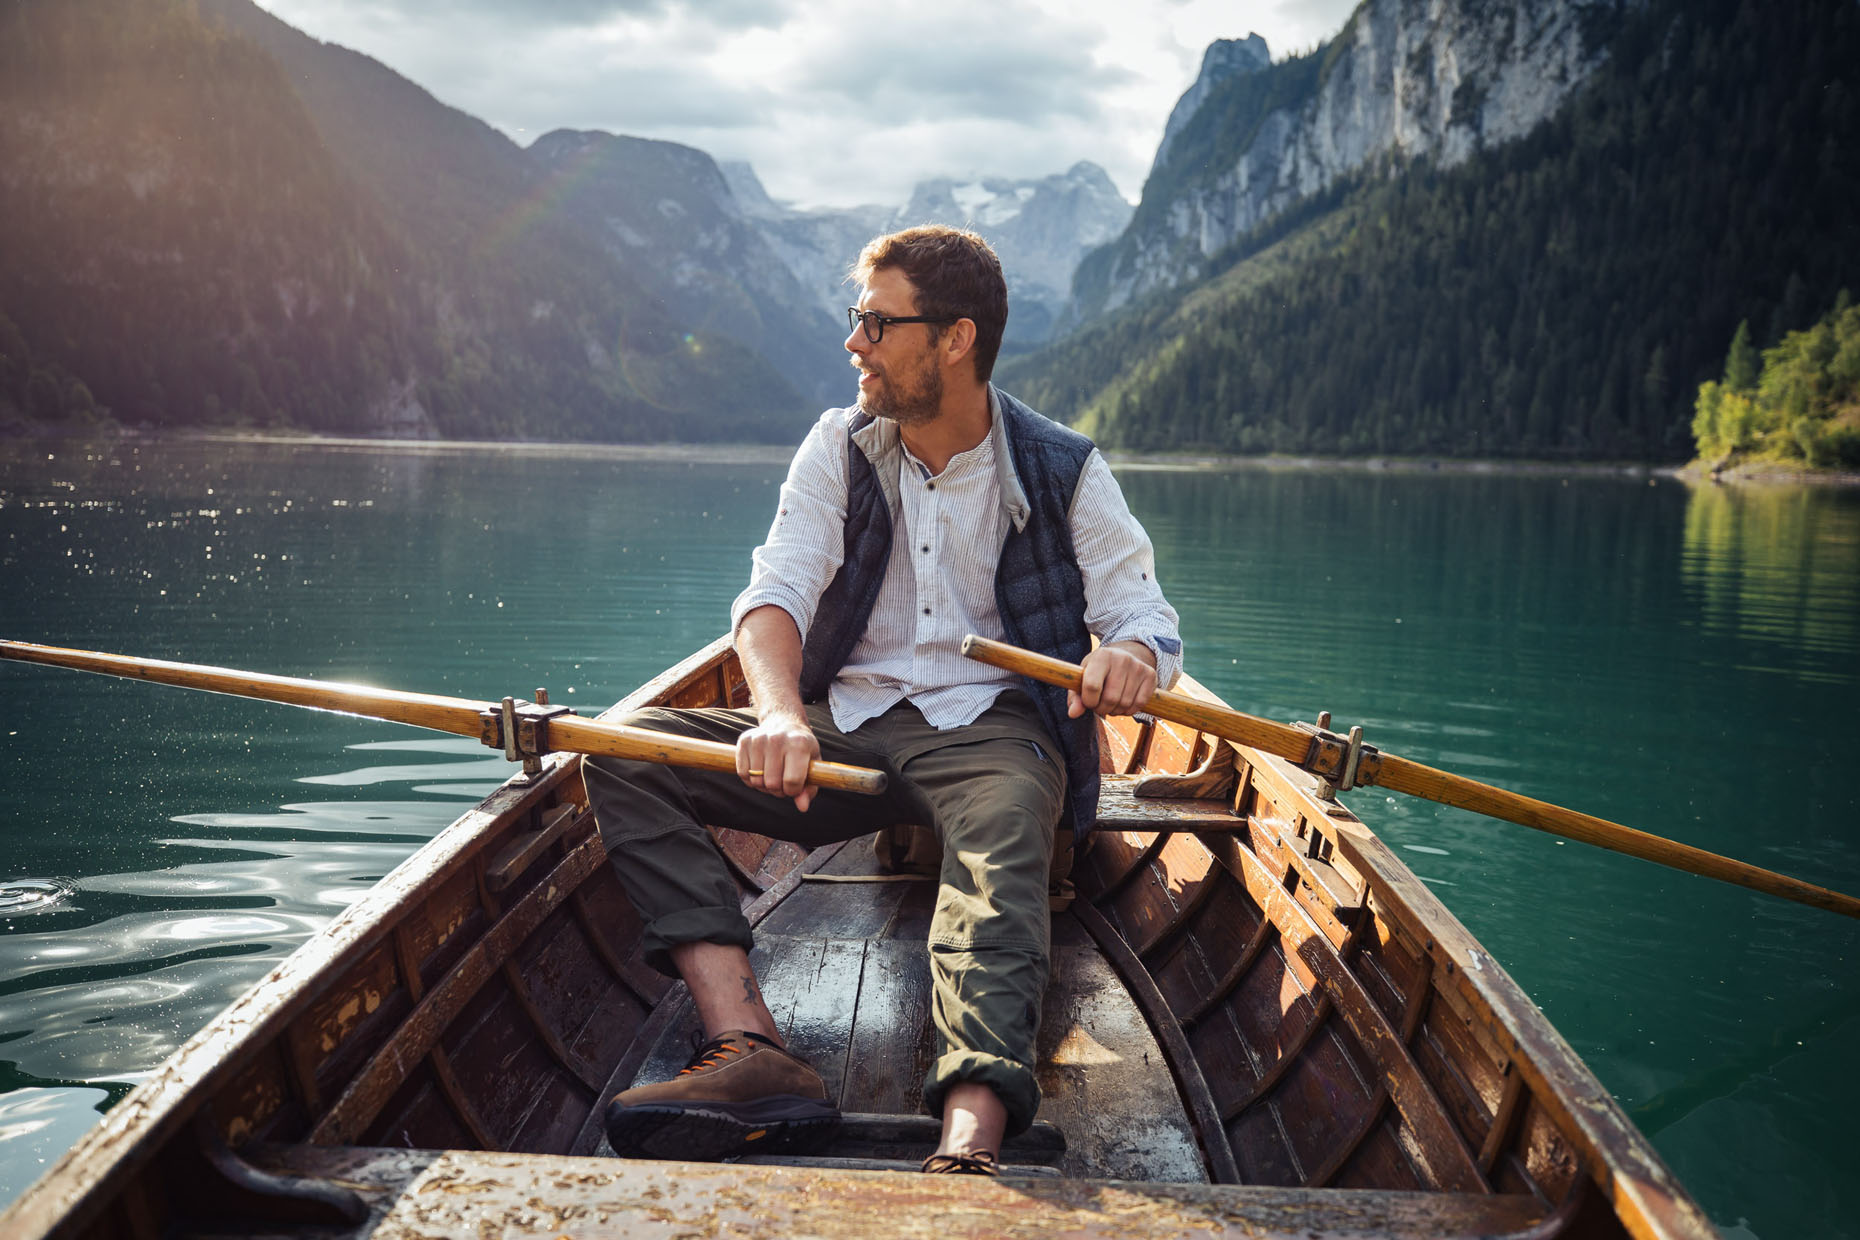 Young man with glasses rowing in a boat on a beautiful alpine lake